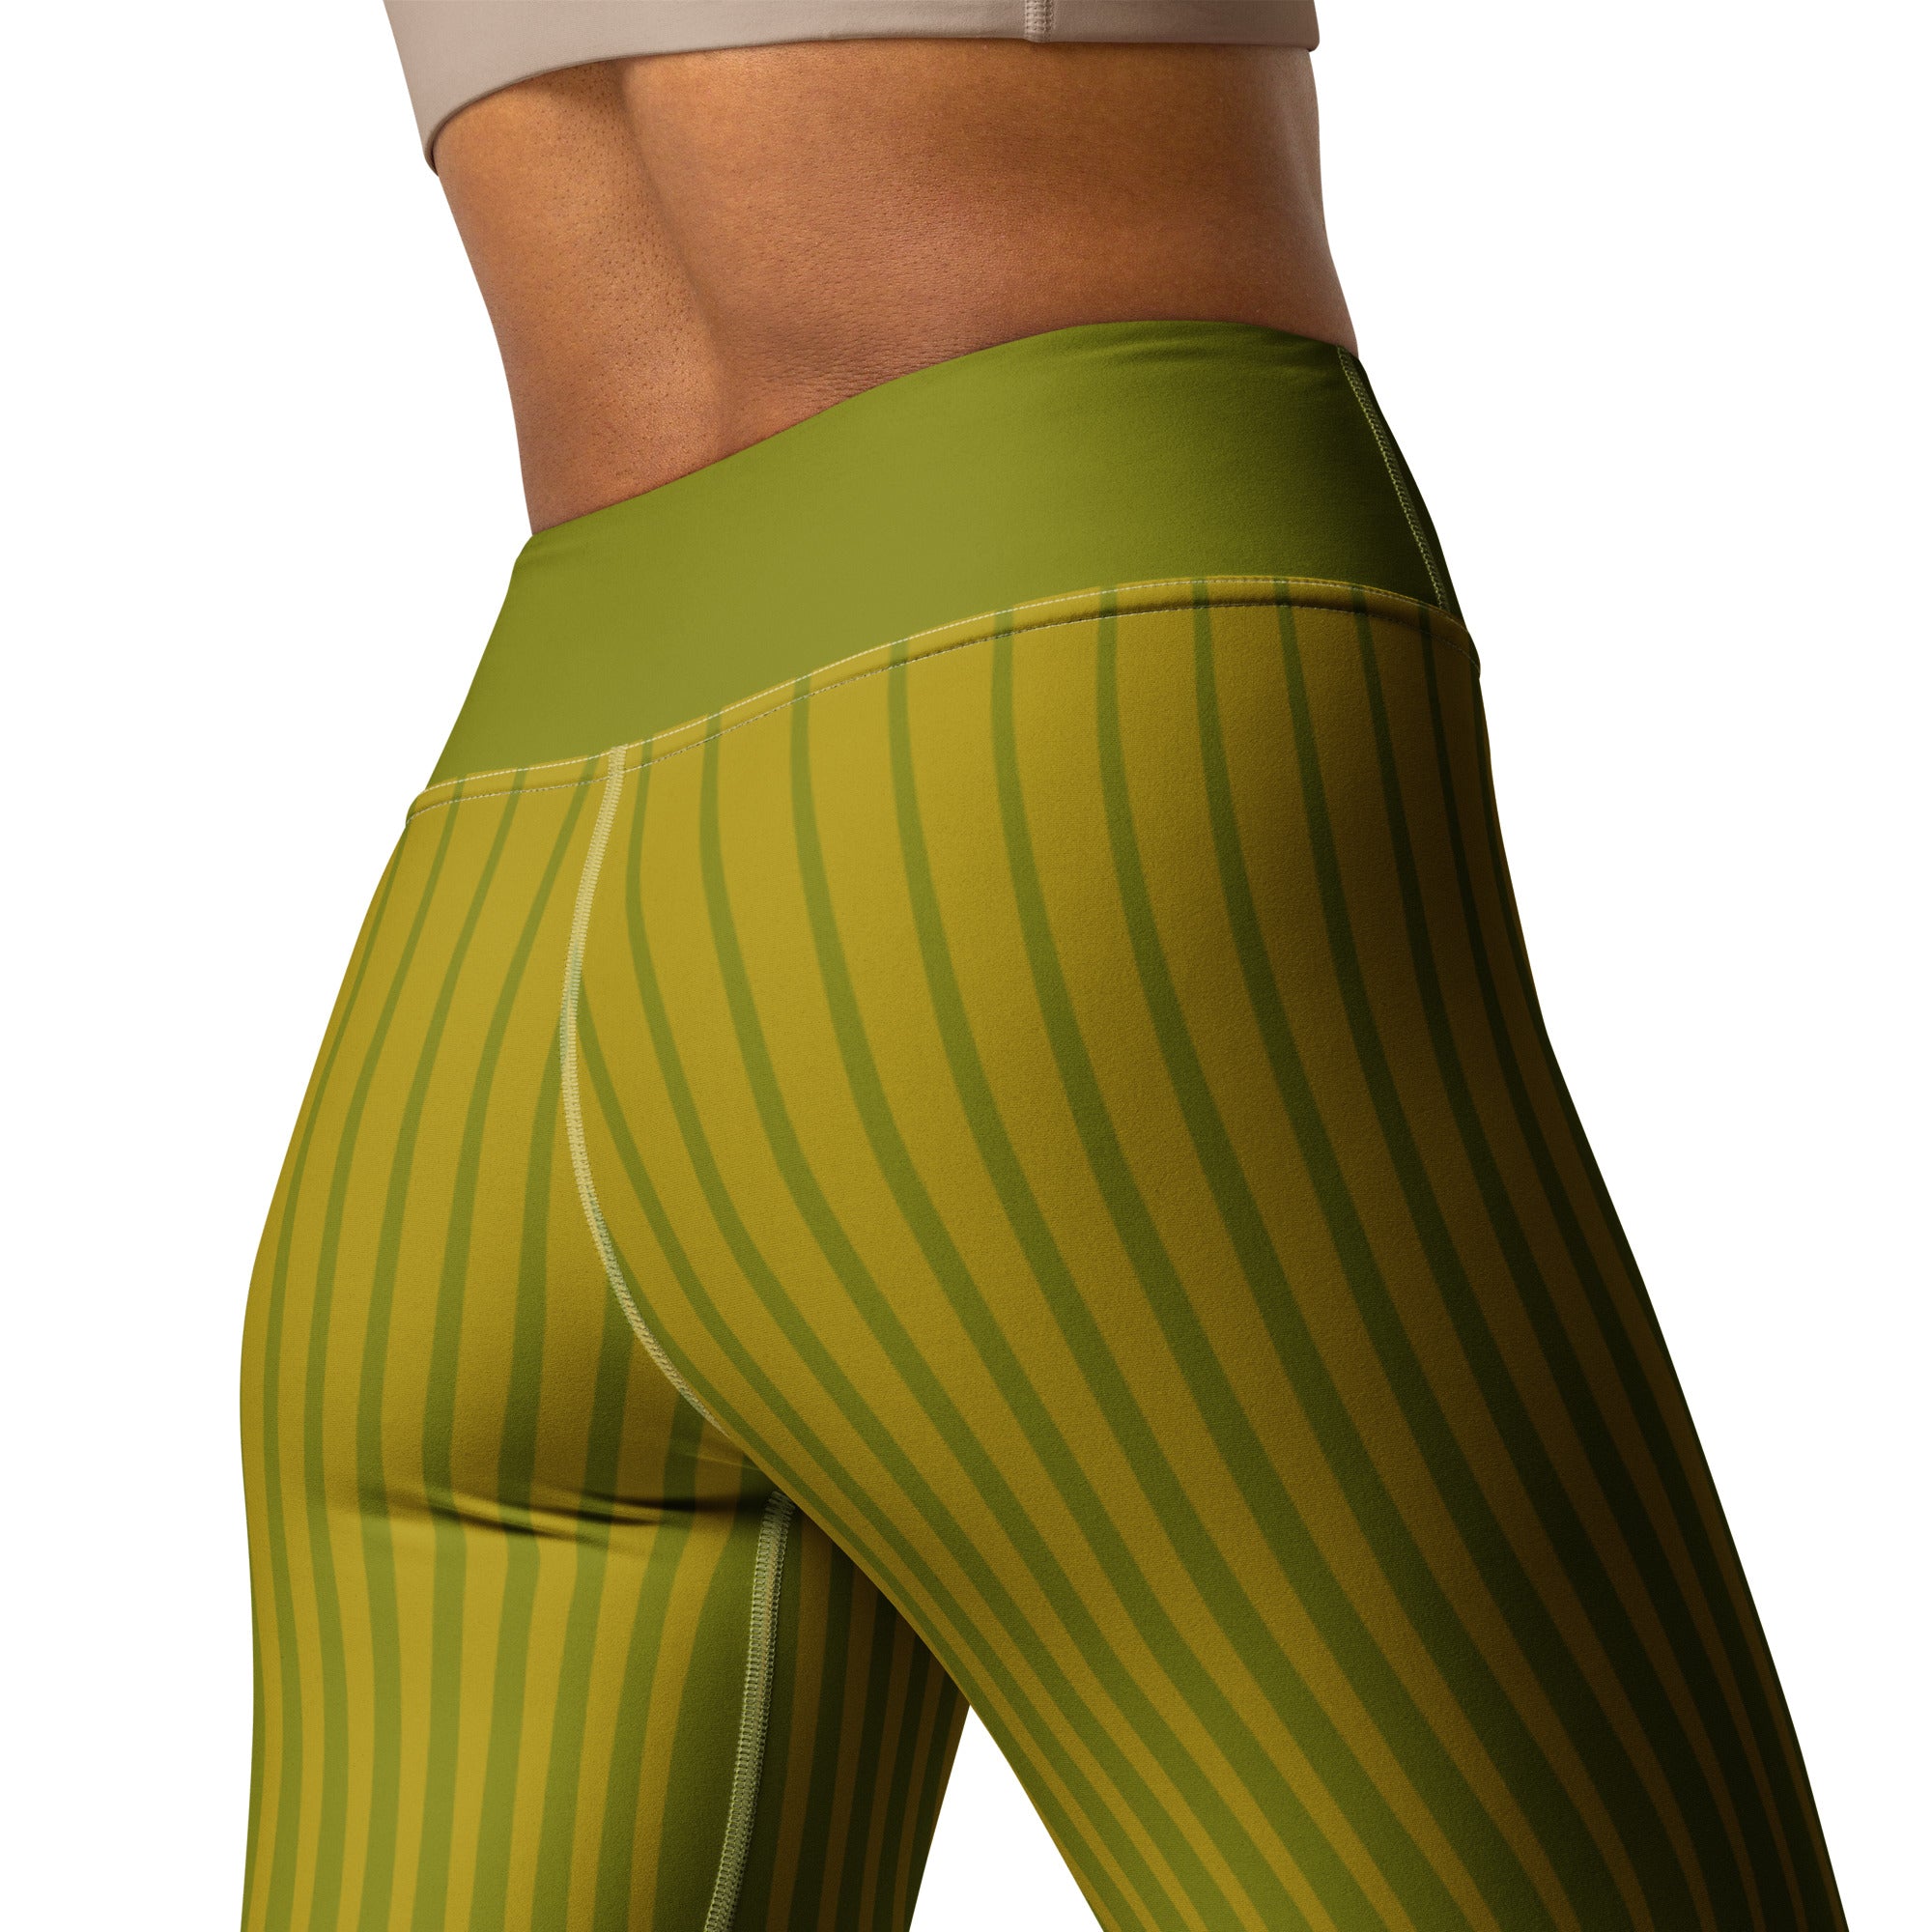 Back view of Emerald Elegance Yoga Leggings showing waistband and fit.